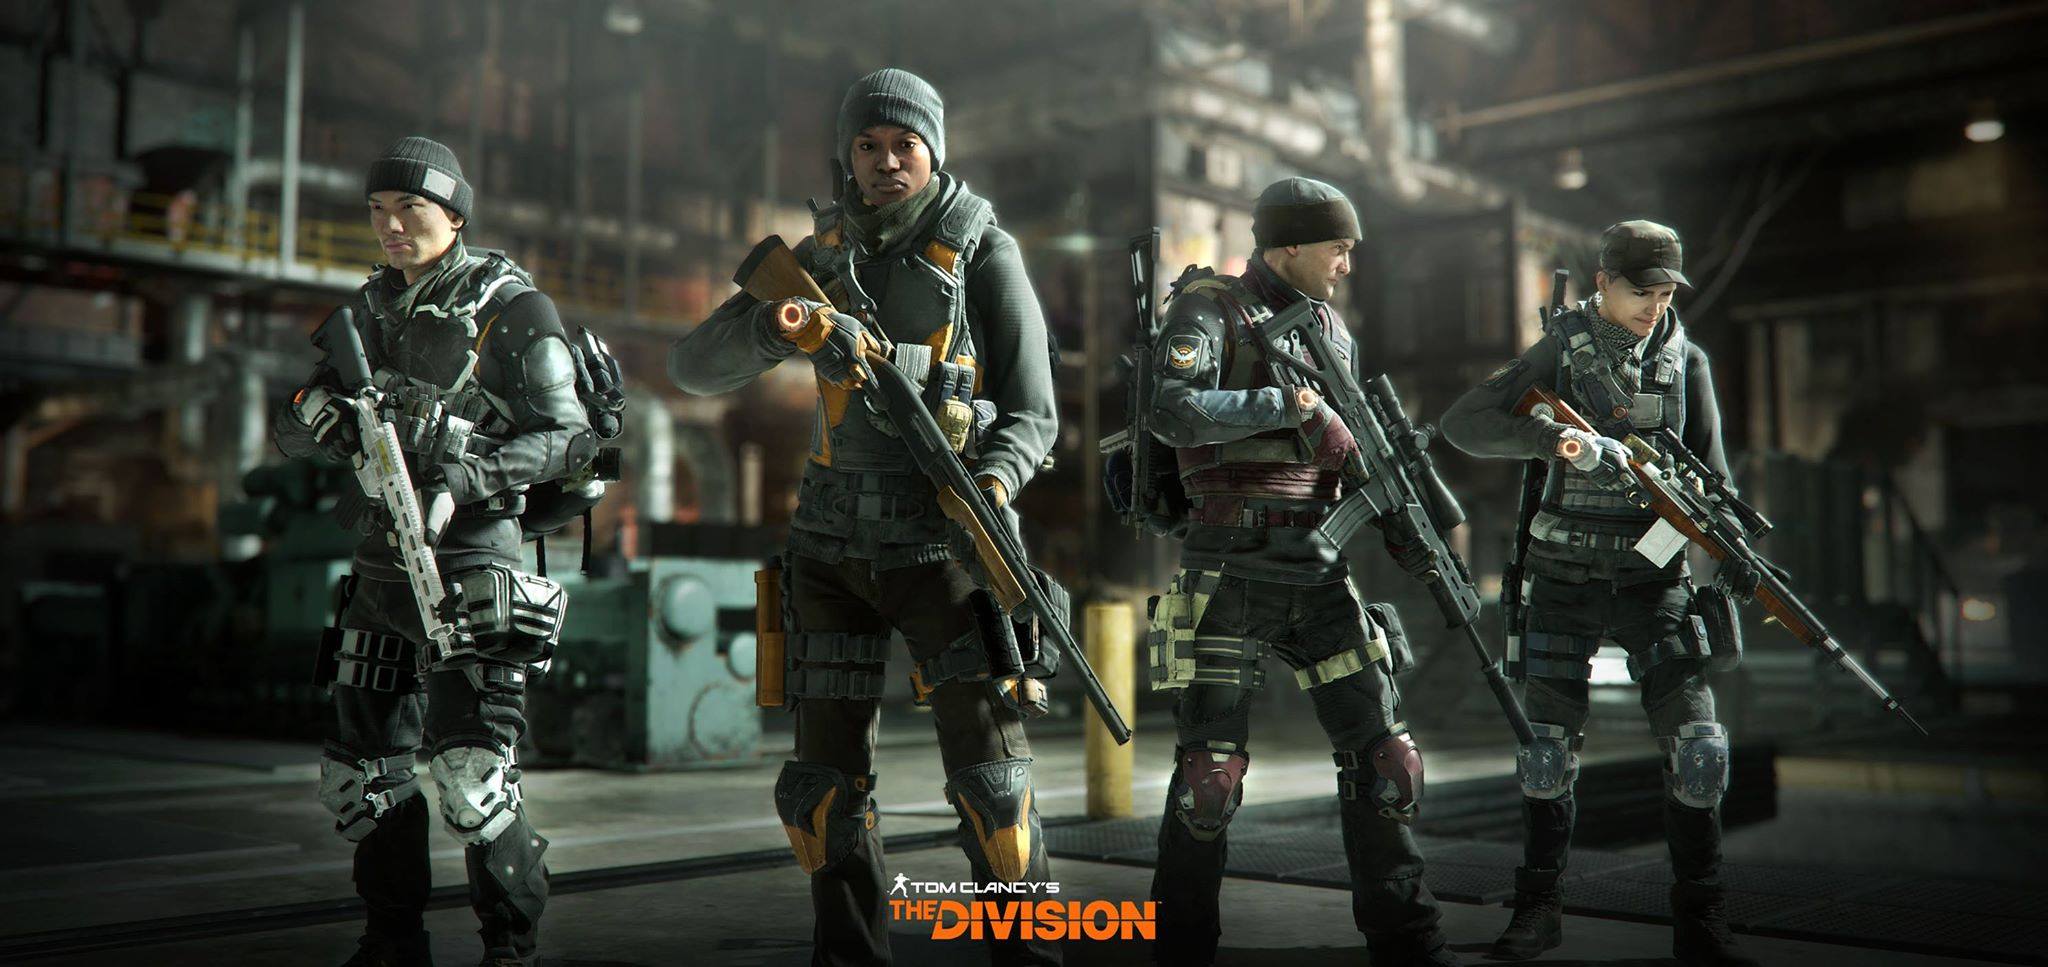 Gear Sets Items The Division Zone